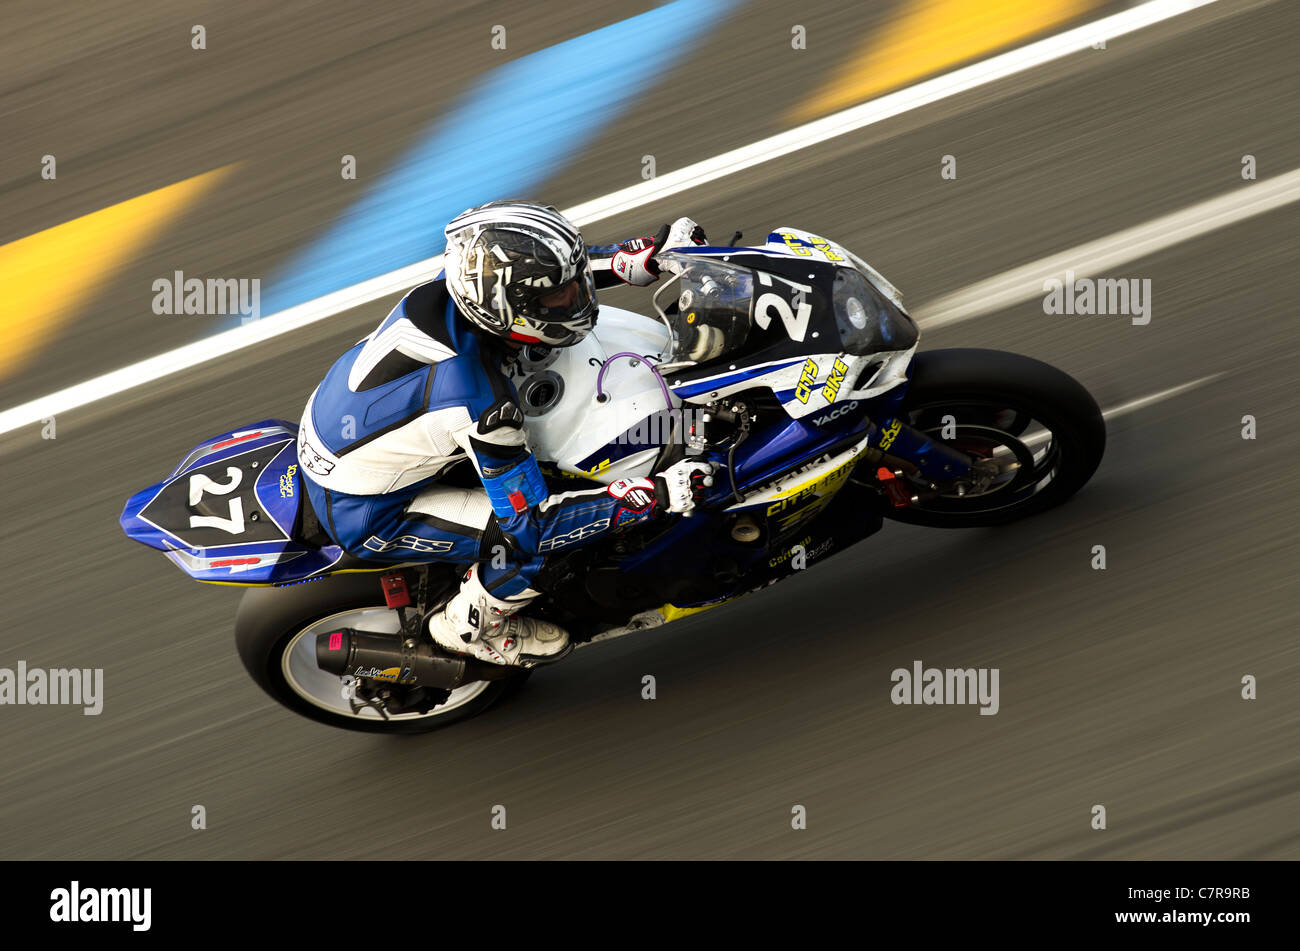 Suzuki from the TRT27 Team during the 2011 24 hours of Le Mans Stock Photo